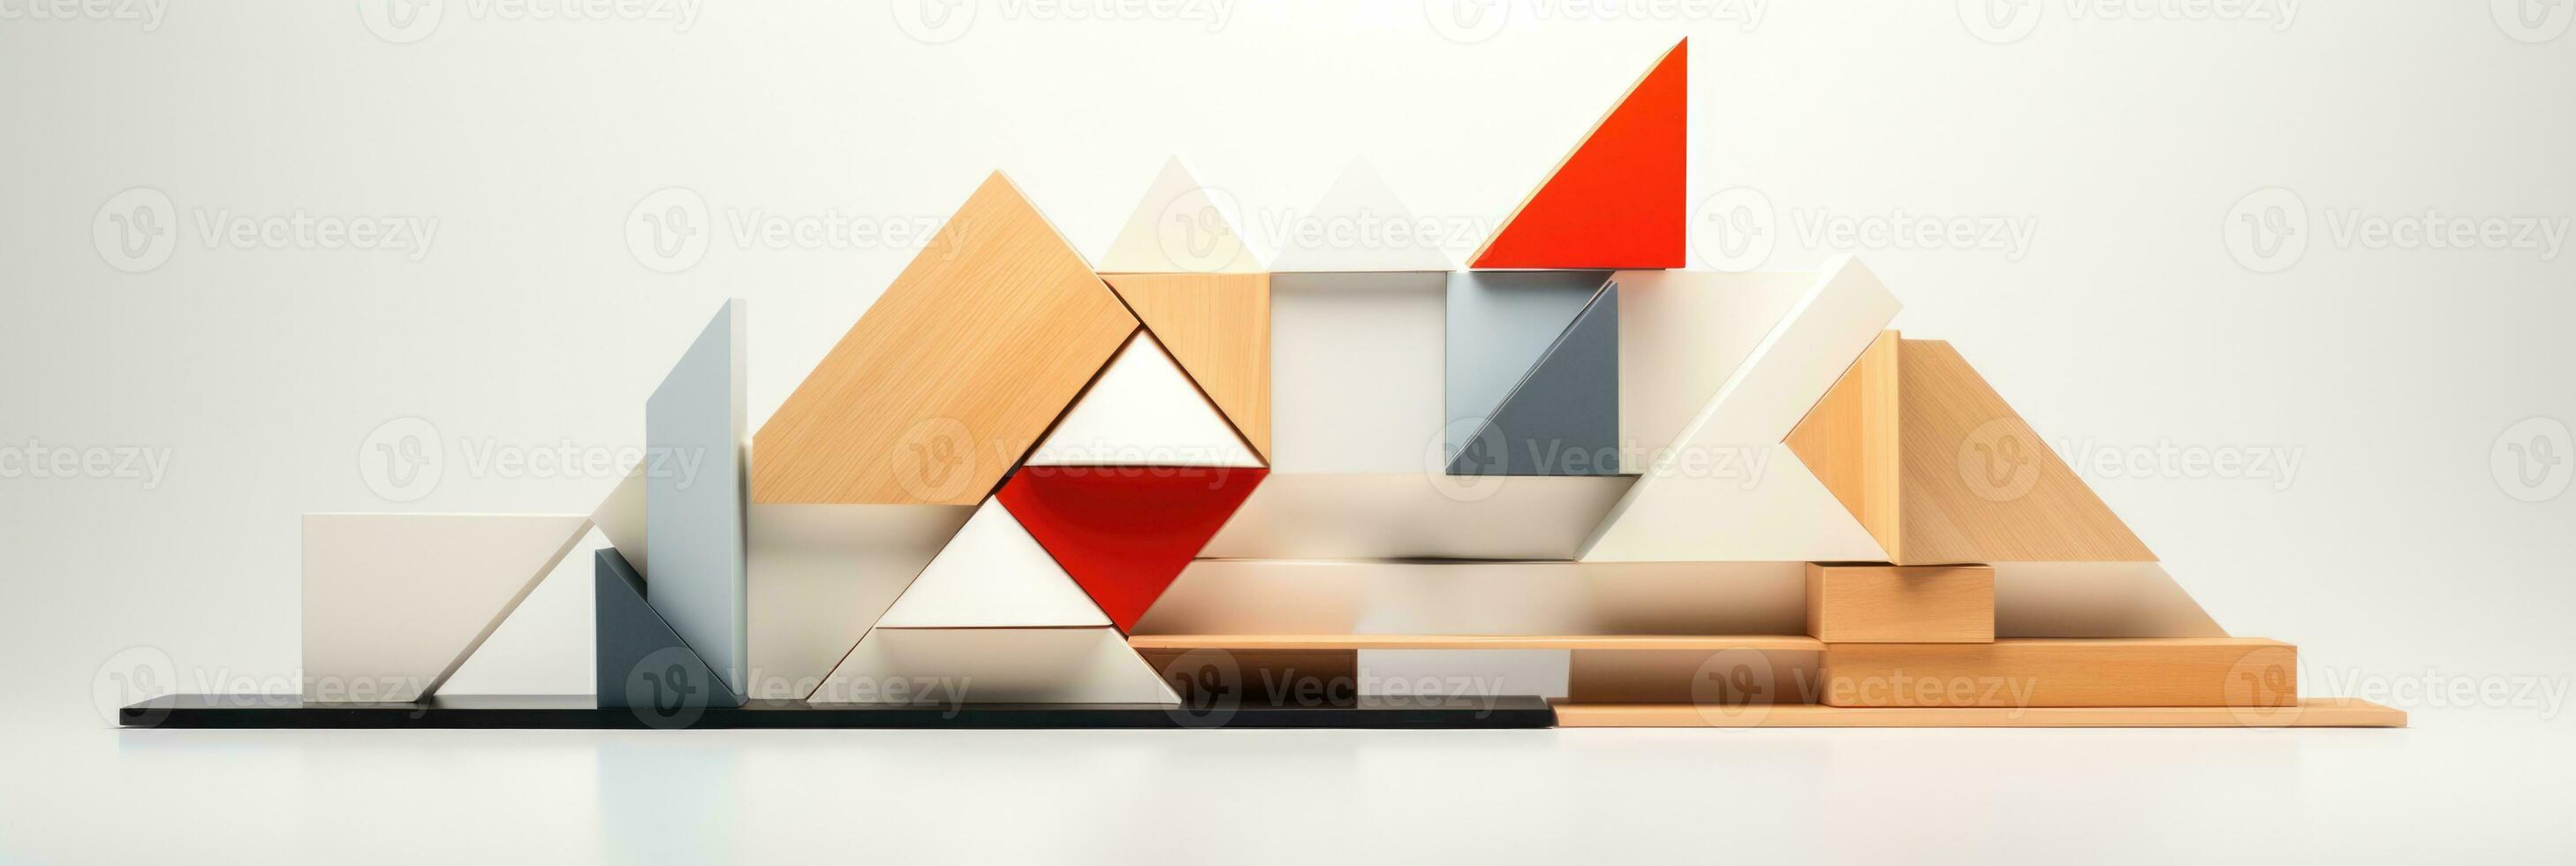 Geometric form architecture model abstract minimalist concept isolated on a white background photo